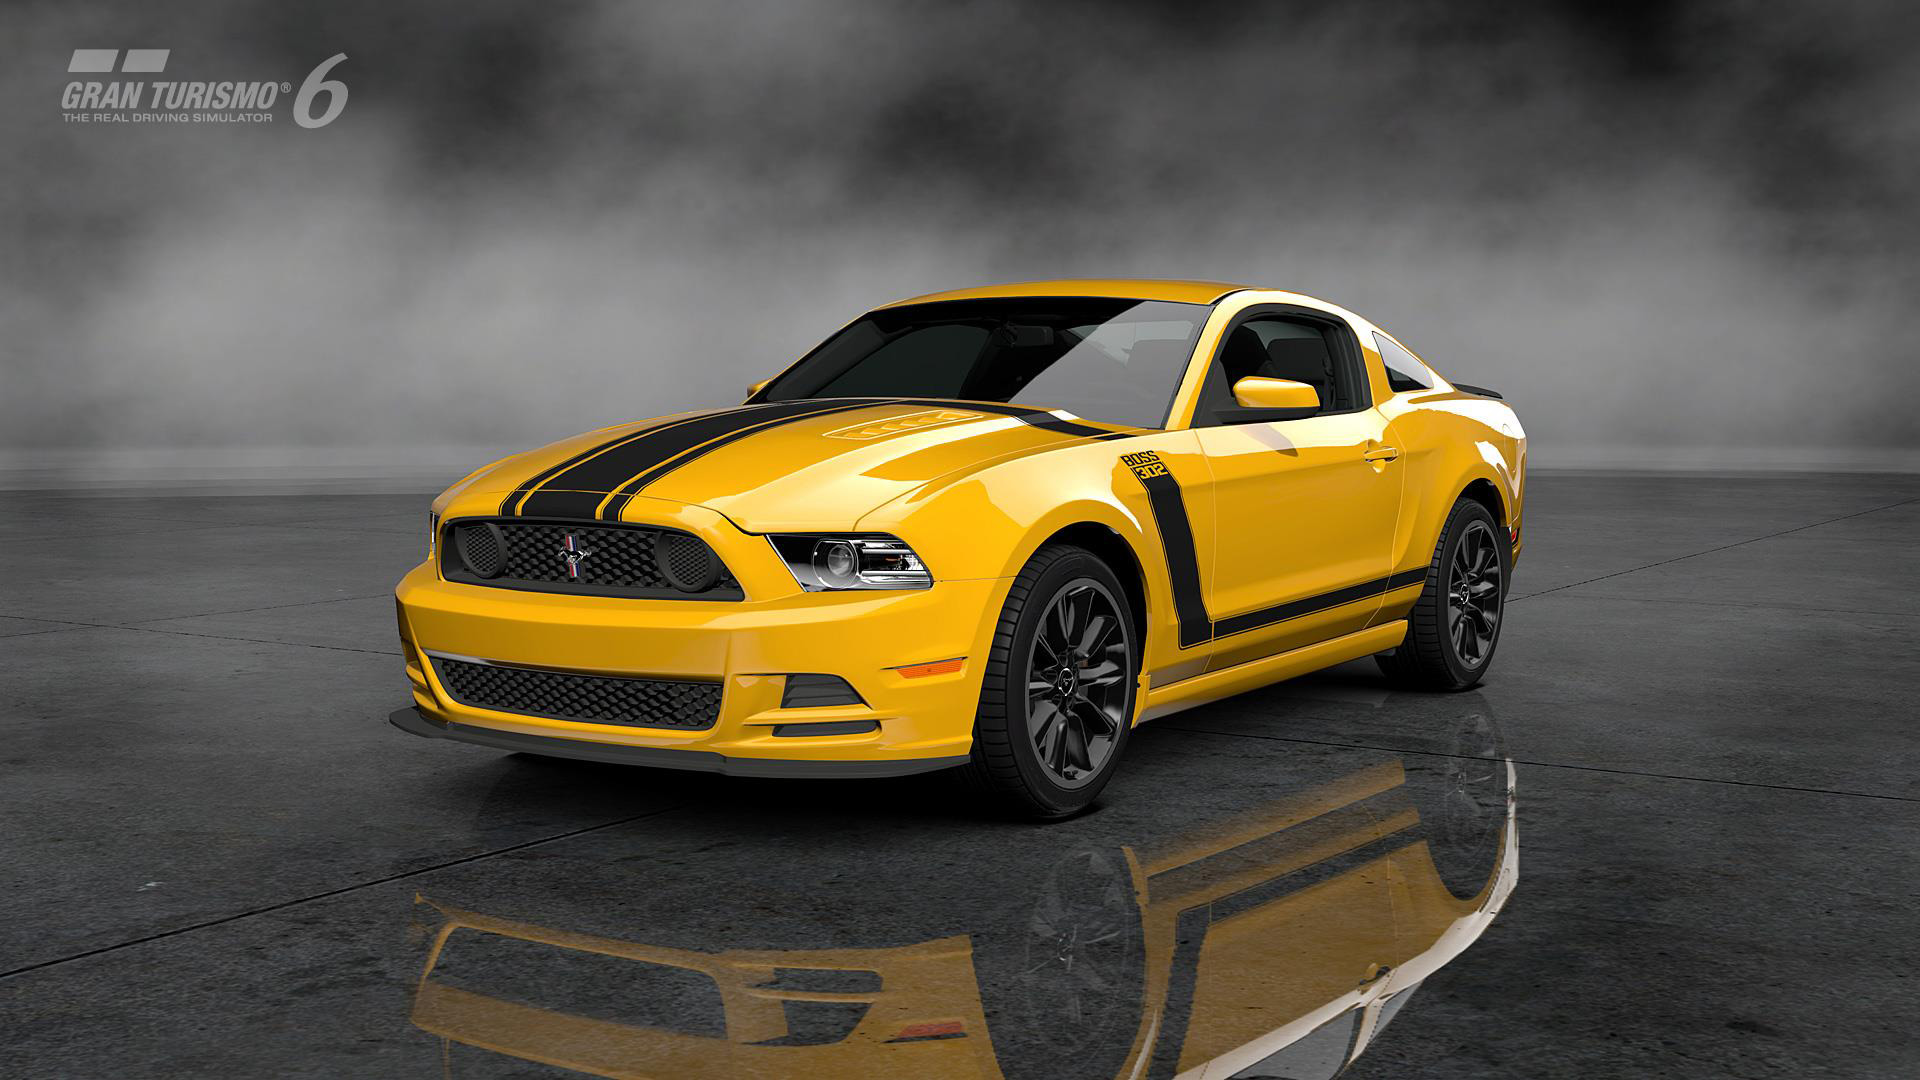 Gran Turismo 6, Video Games, Car, Vehicle, Mist, Reflection, Ford Focus ST, Ford Mustang Boss 302 Wallpaper